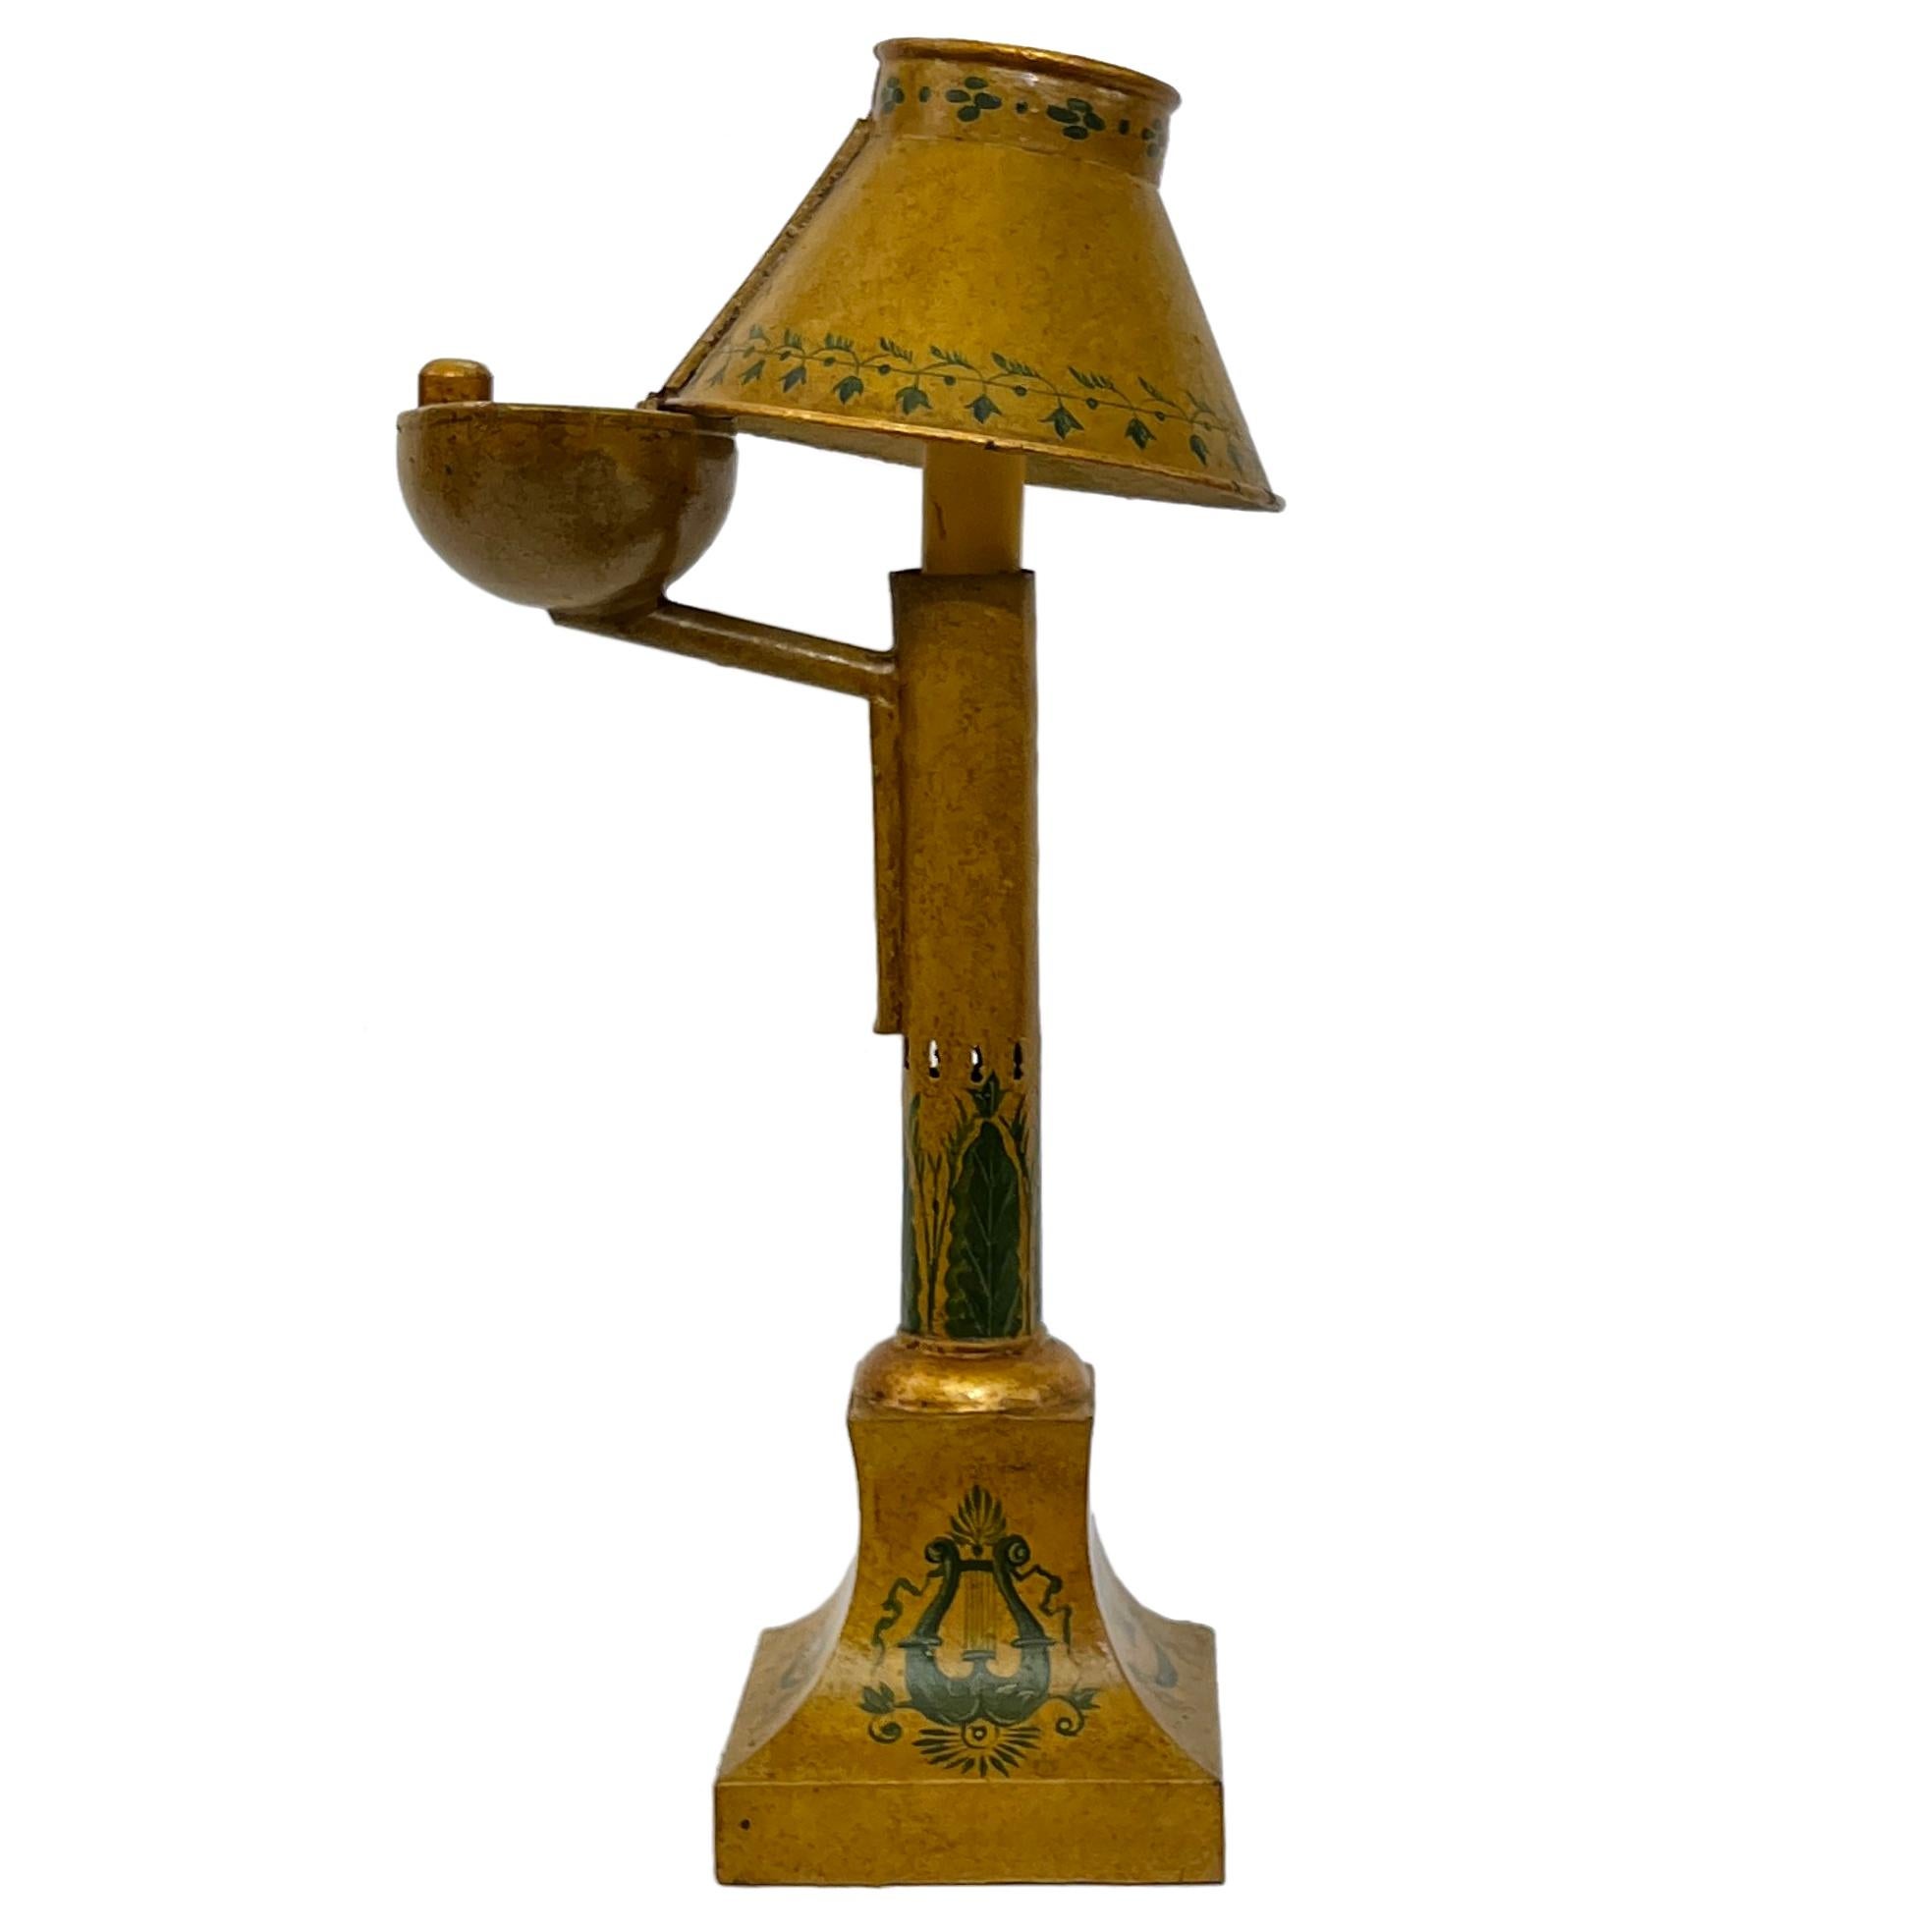 A circa late 19th century French painted tole lamp, wired for electric use.

Measurements:
Height: 14.75